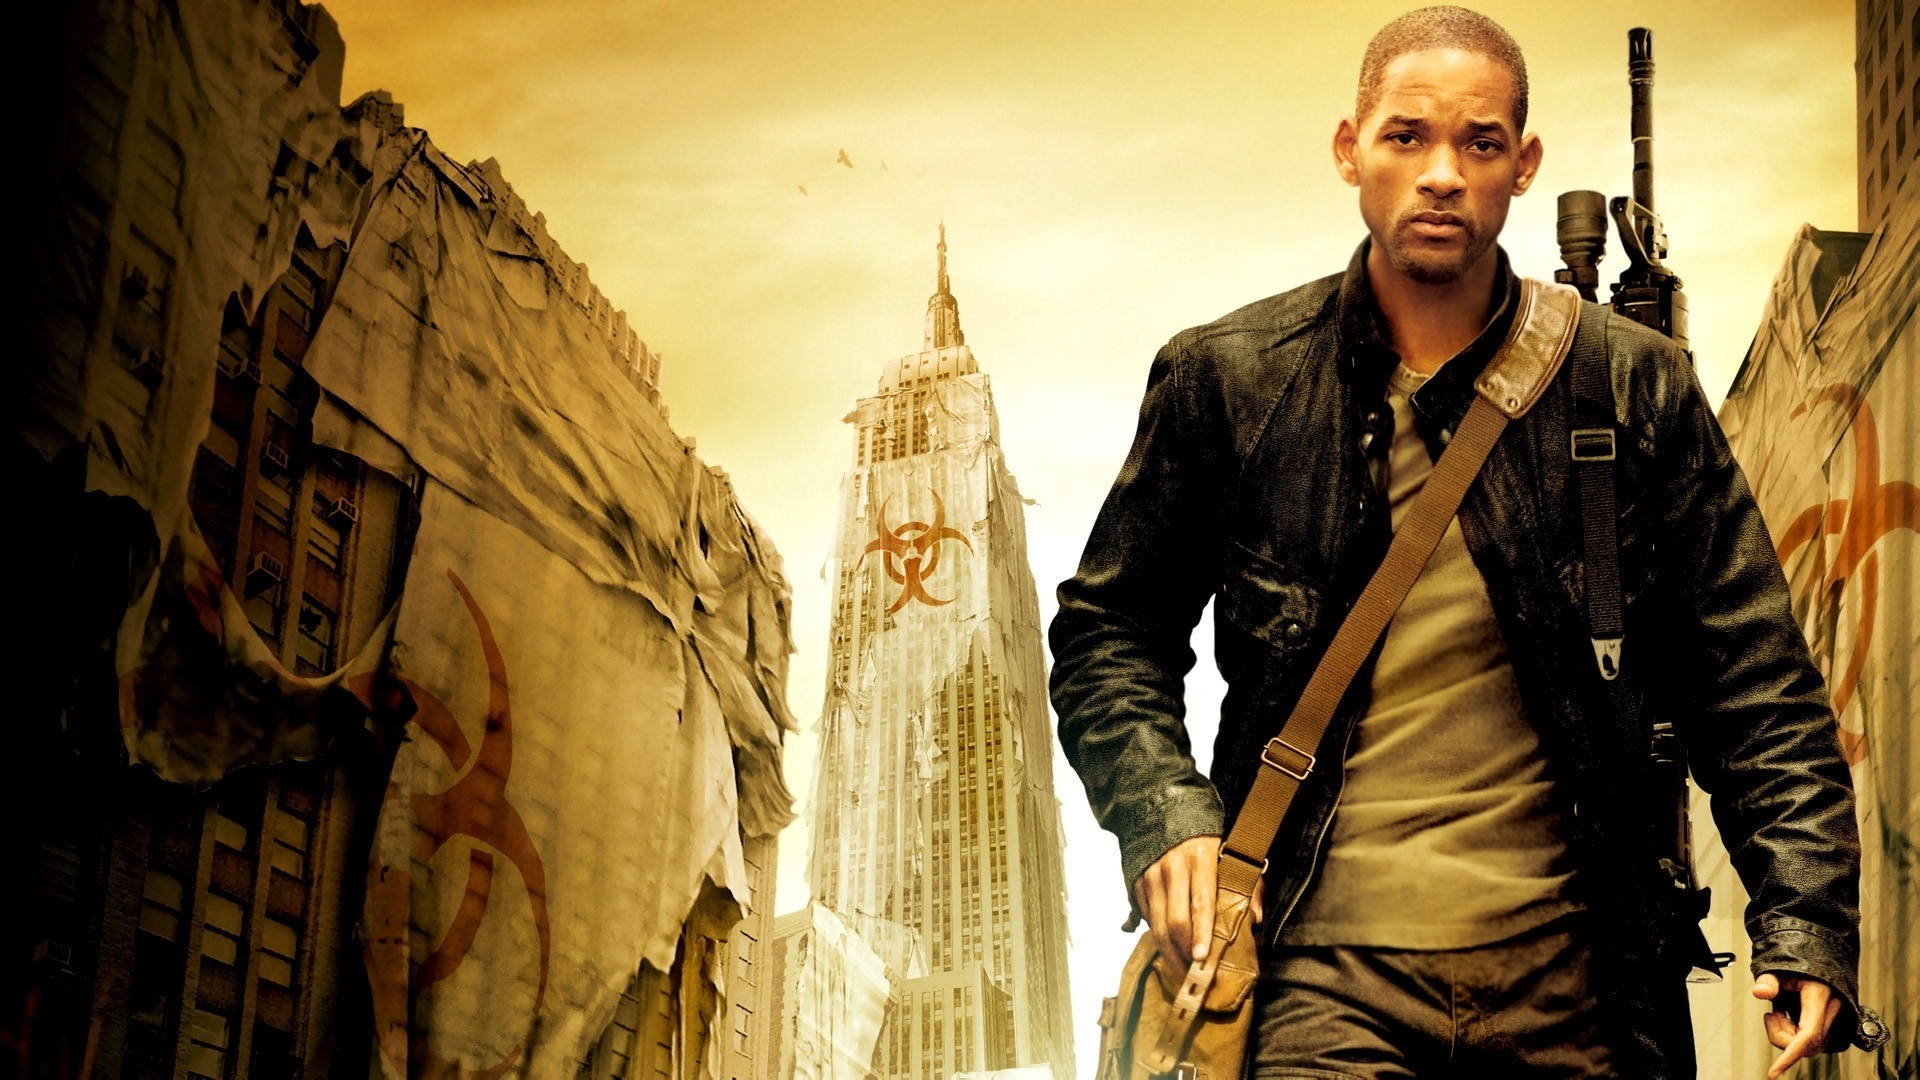 Will Smith: U.S. Army virologist LTC Robert Neville living an isolated life in deserted Manhattan. 1920x1080 Full HD Background.